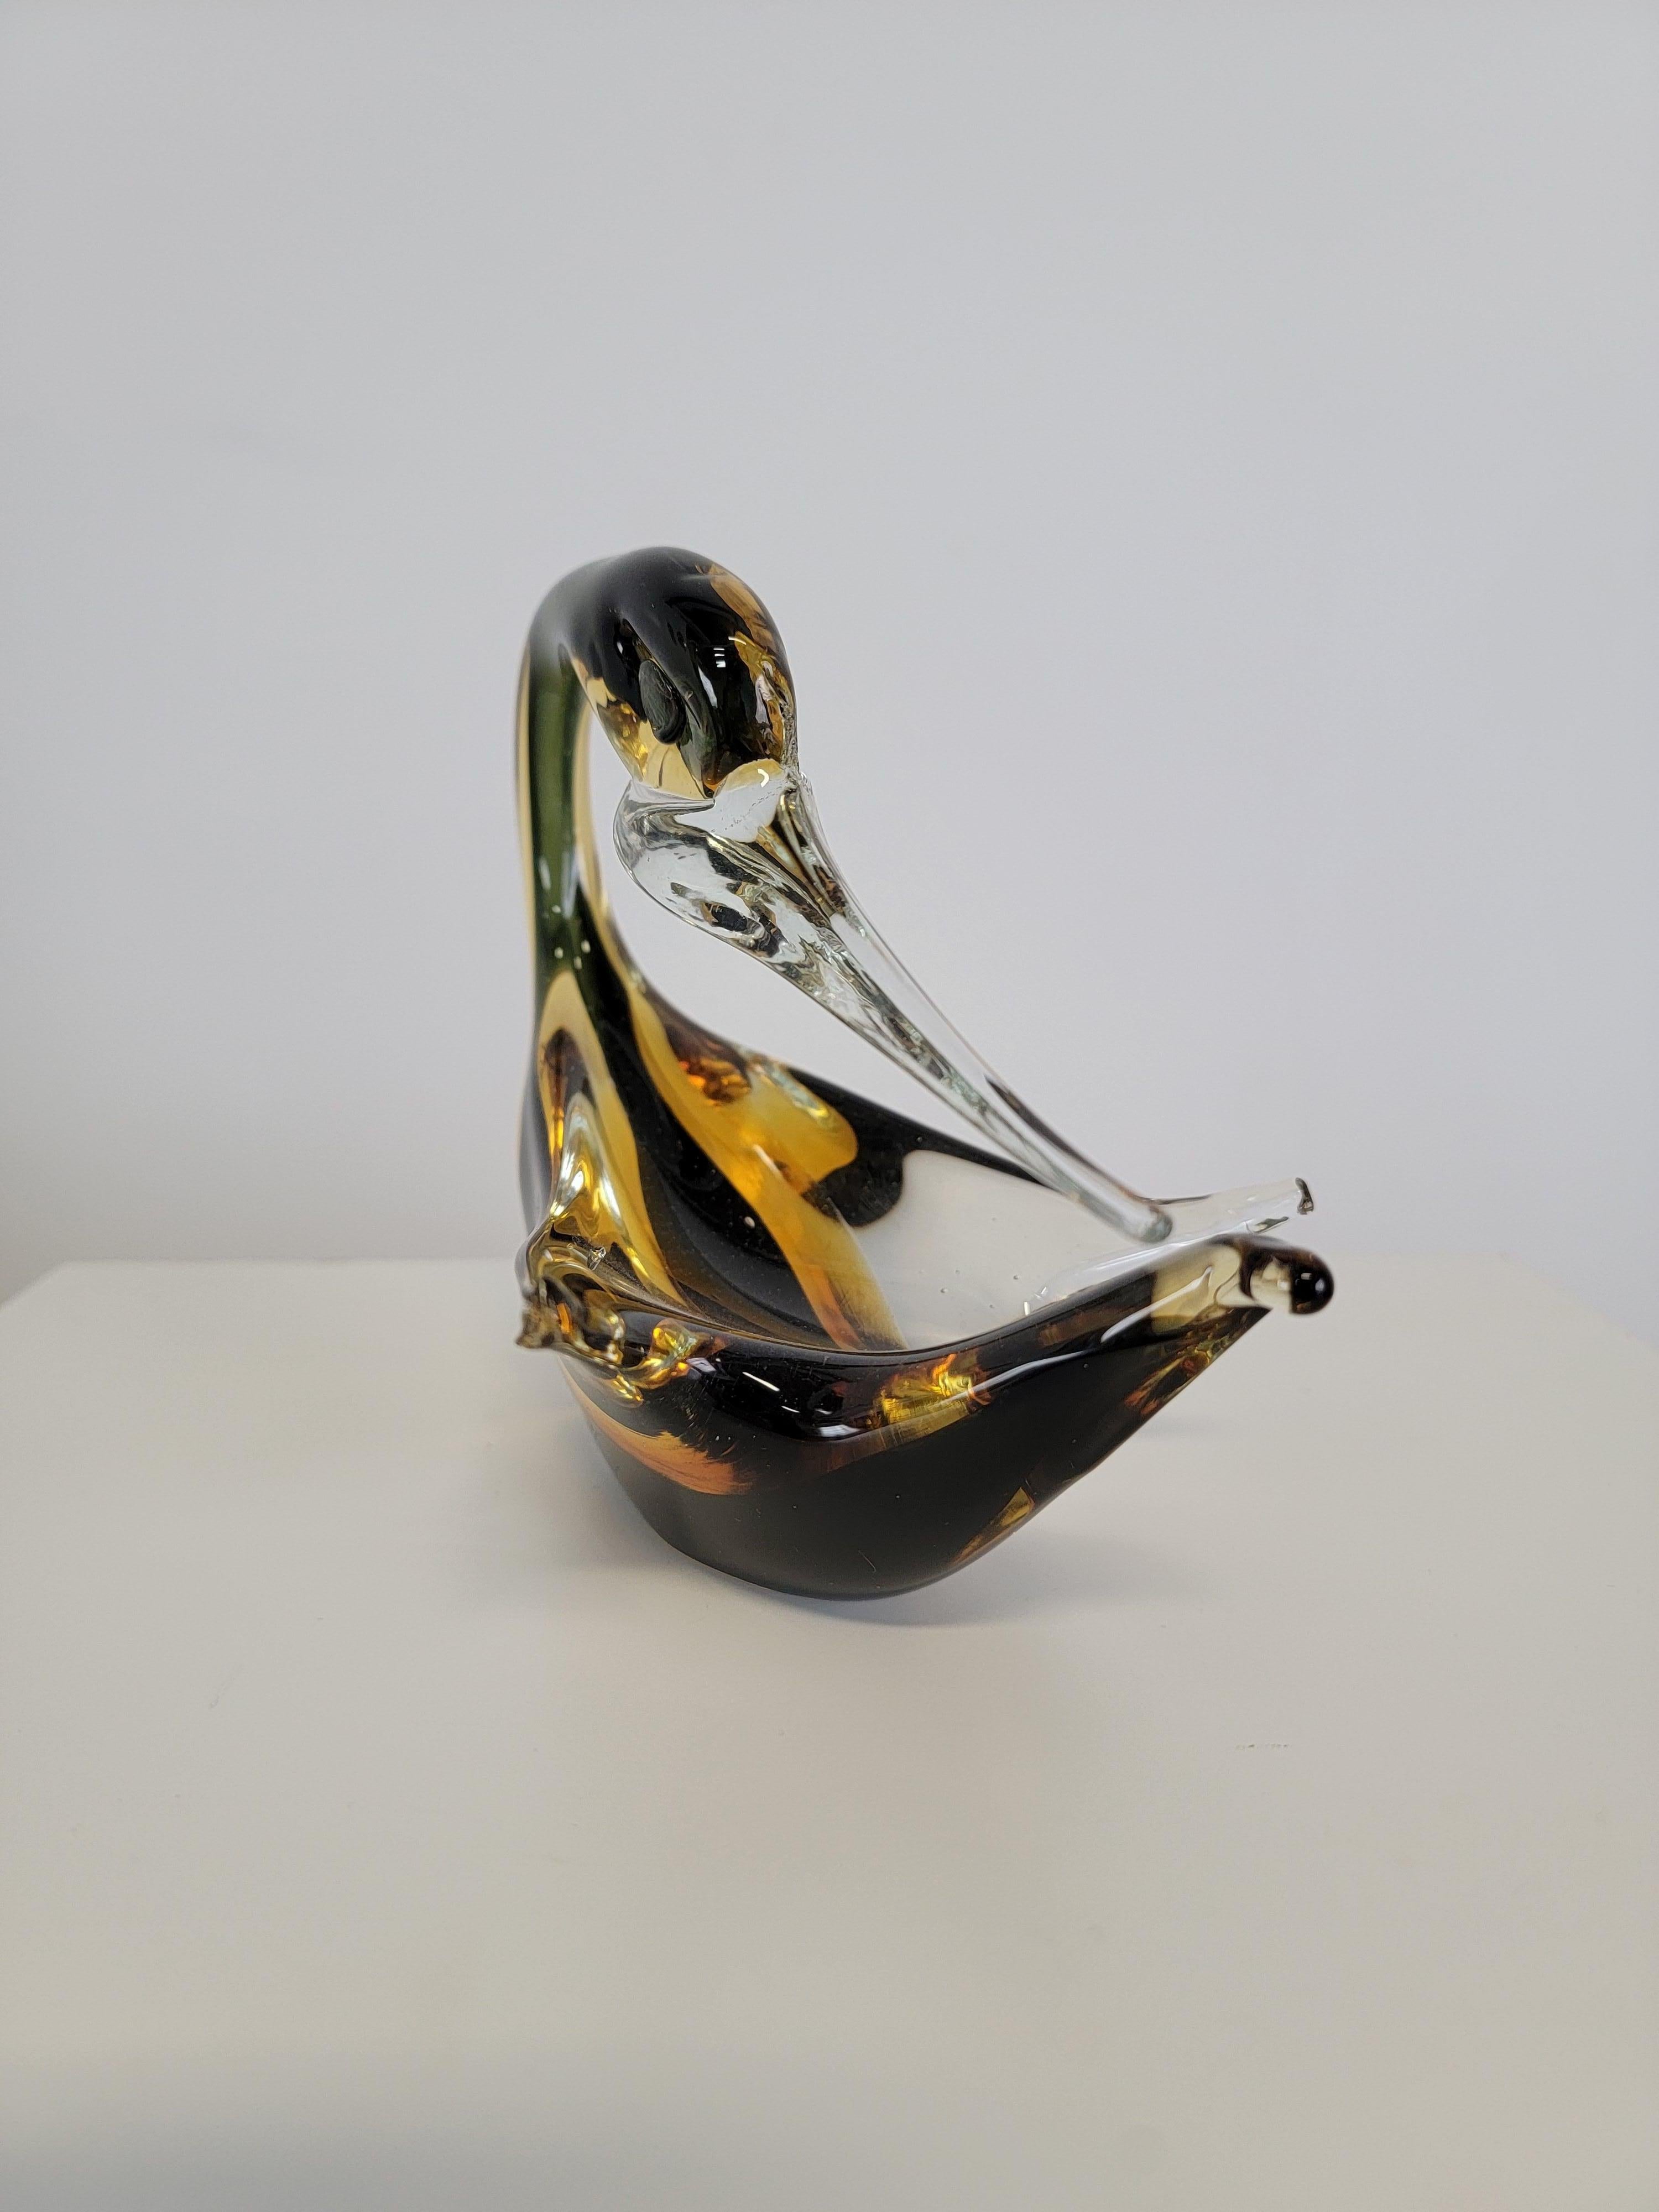 Beautiful art murano glass swan figurine. This art glass figurine was made using the Sommerso technique. This technique involves submerging a glass blown piece into crystal clear glass of a different colour. This art piece features yellow, black and